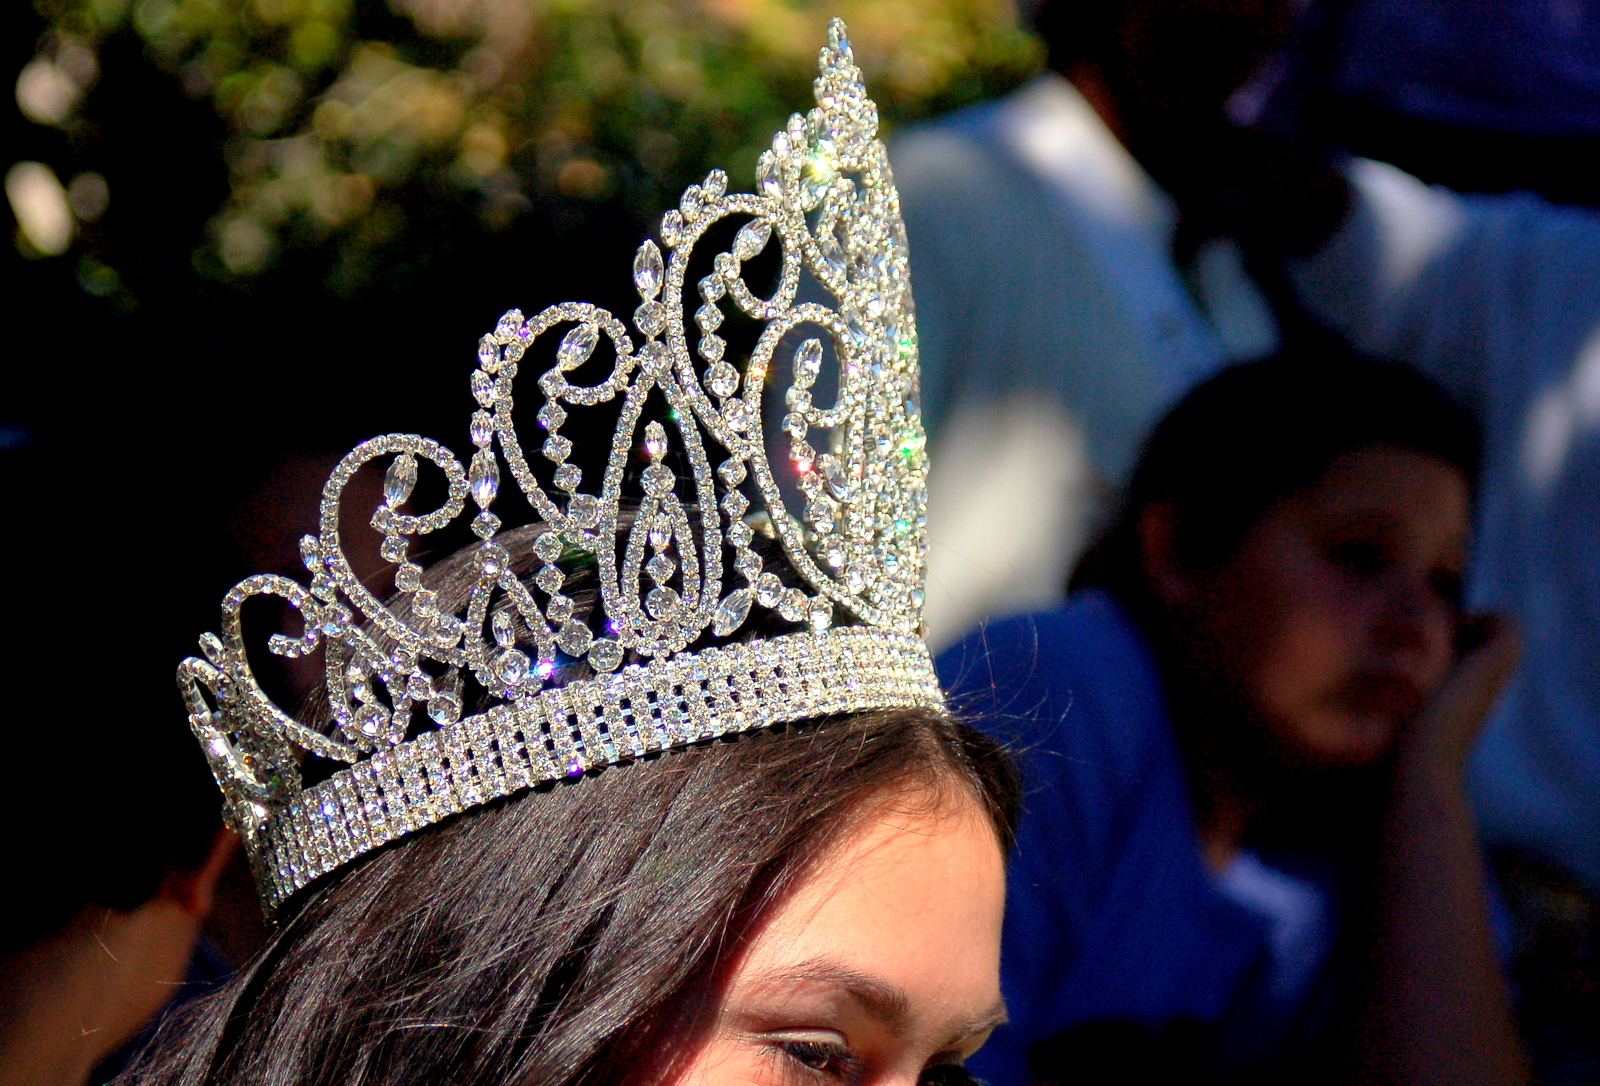 the young woman in the tiara looks back